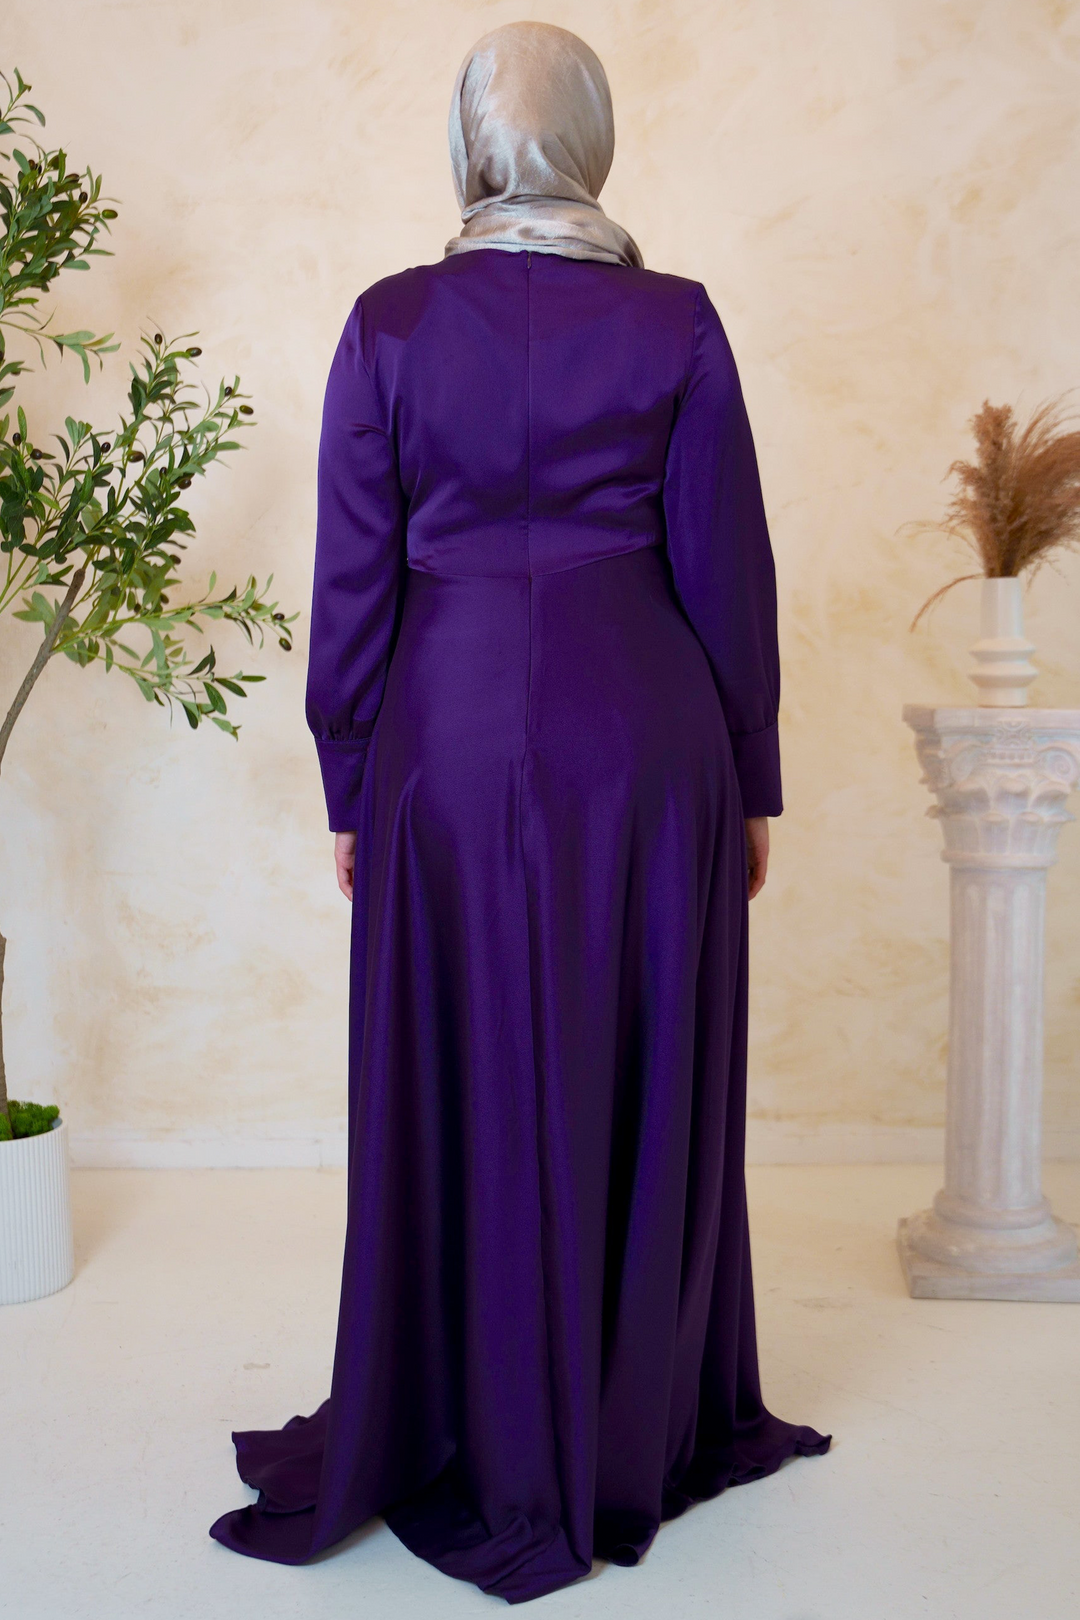 a woman in a purple dress standing in front of a plant